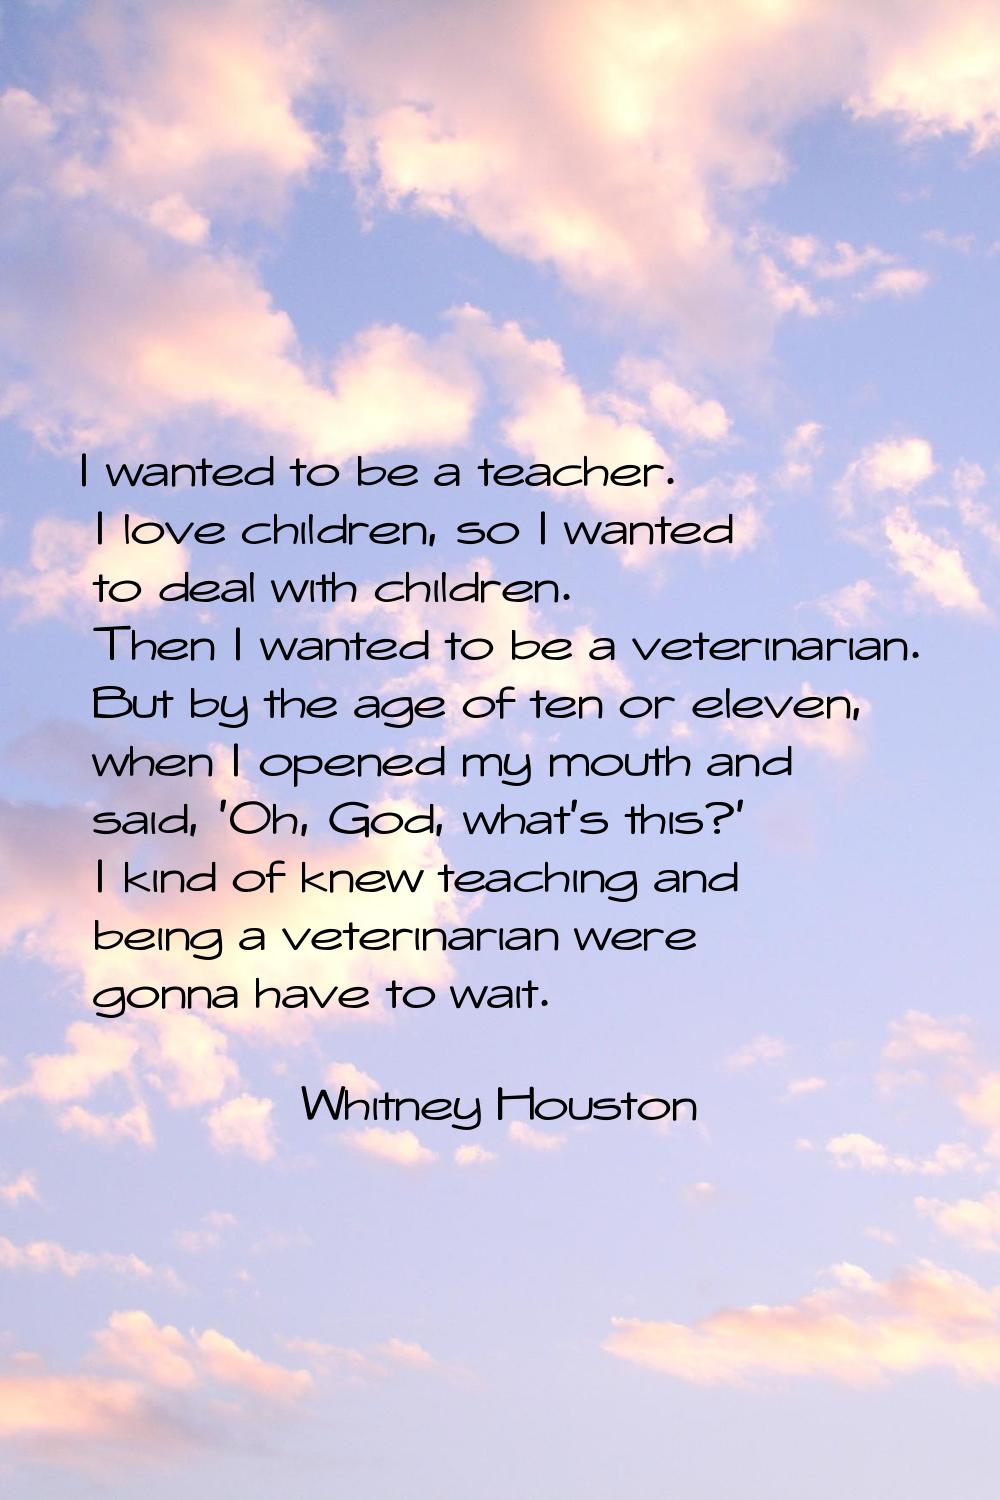 I wanted to be a teacher. I love children, so I wanted to deal with children. Then I wanted to be a